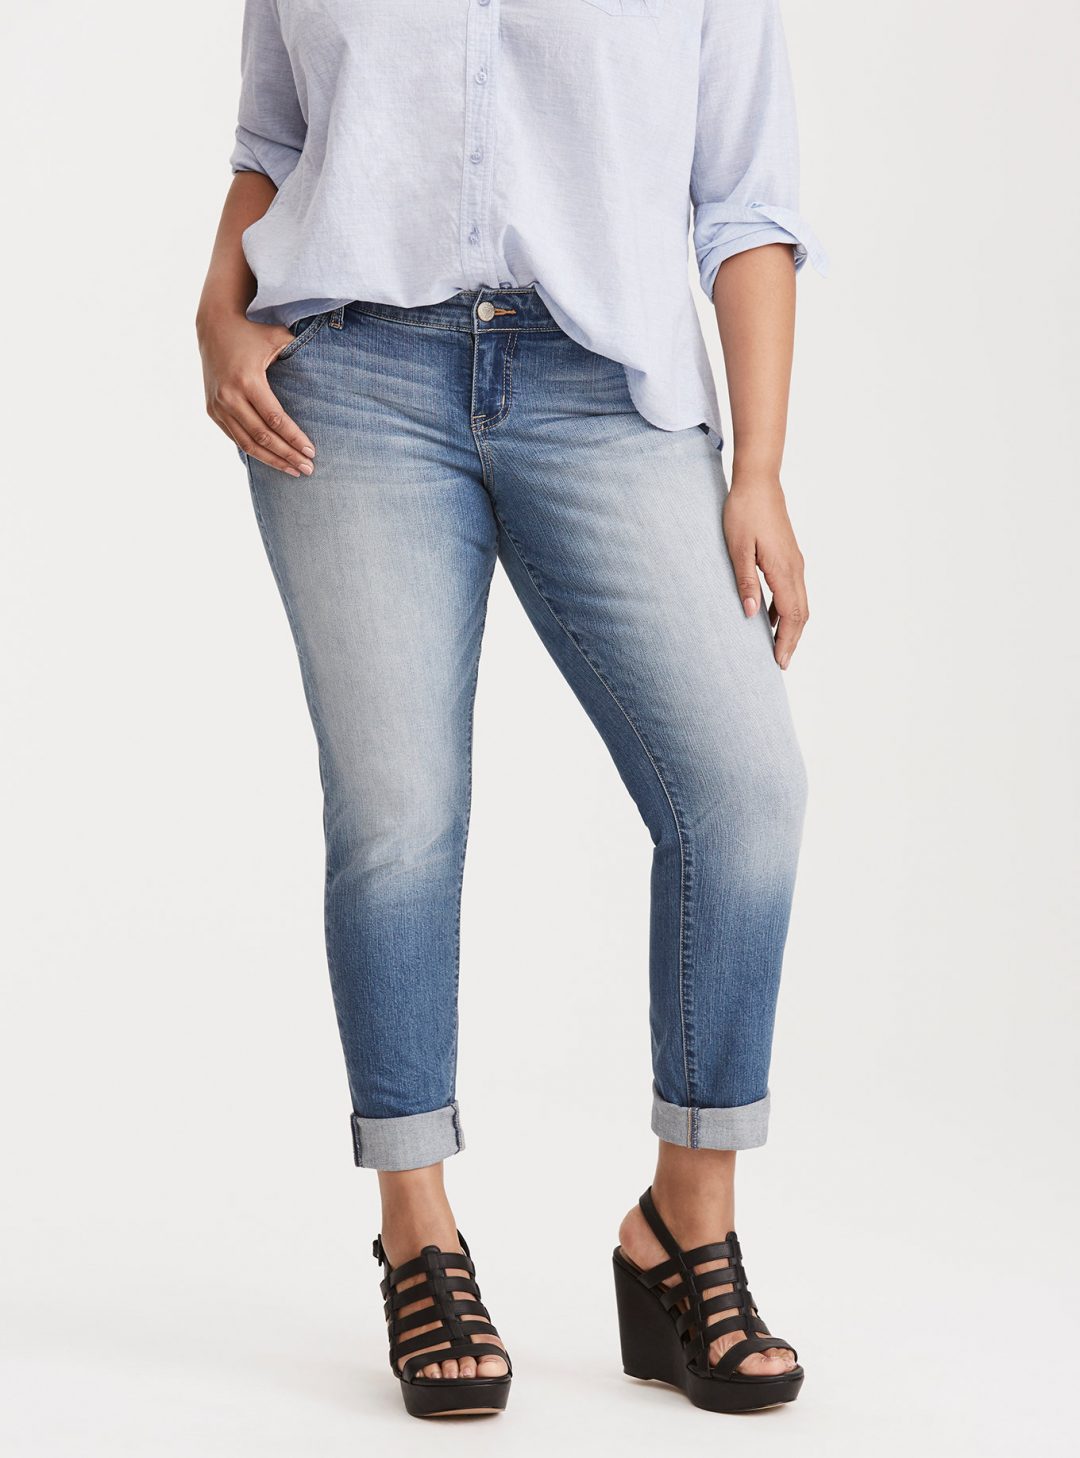 The best, most affordable places to buy jeans for tall girls.